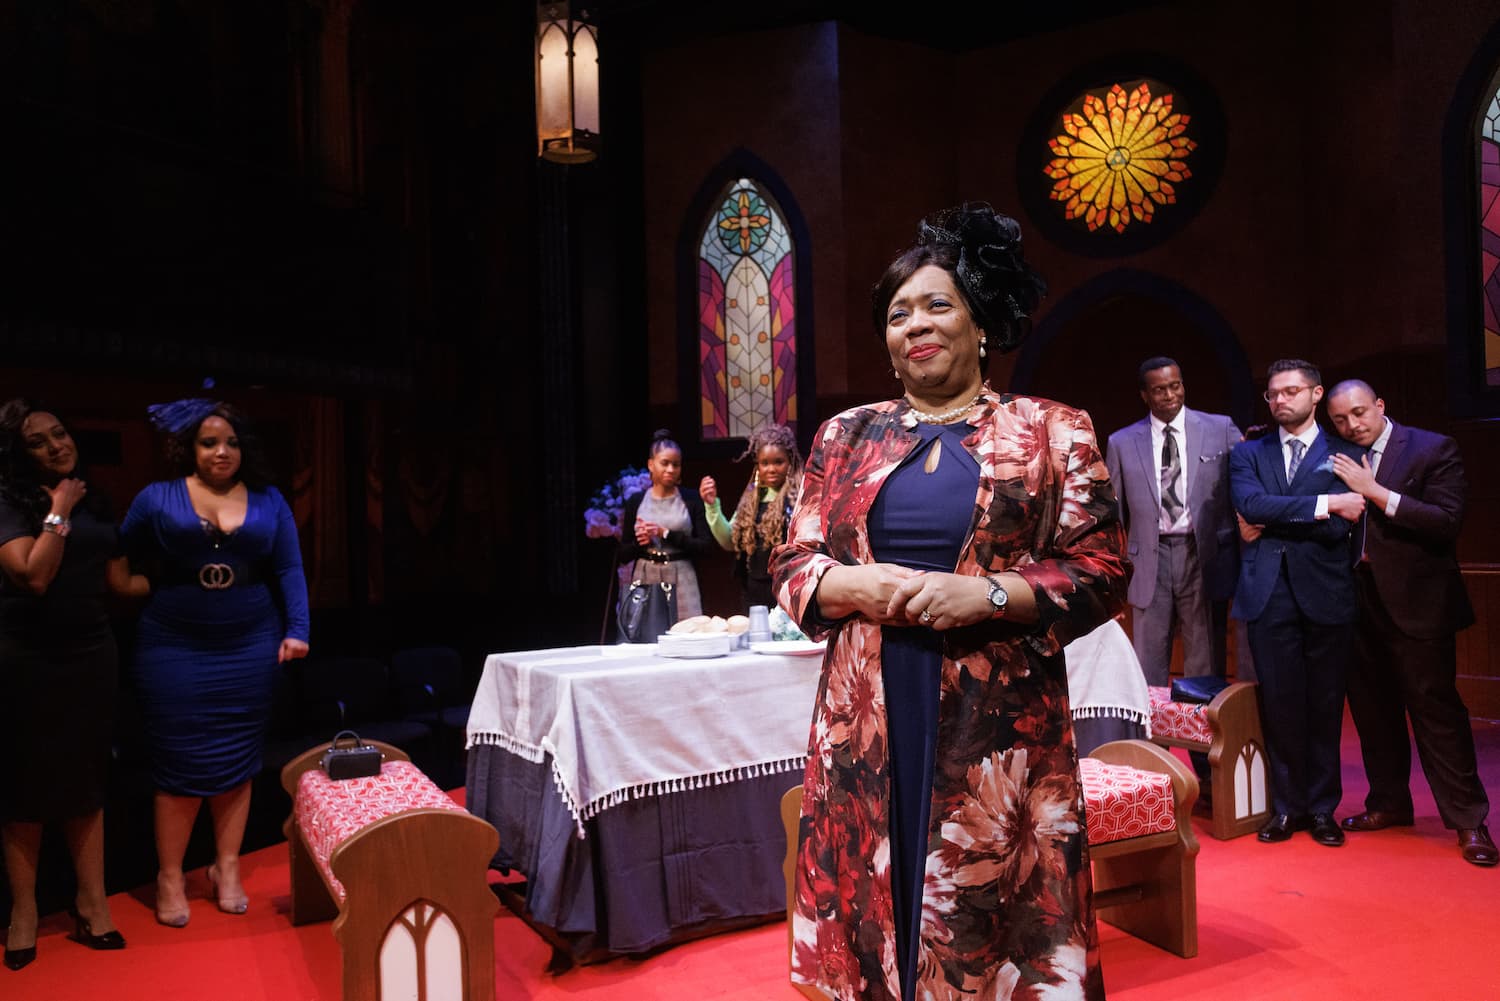 Jacqui Parker as matriarch Beneatta contemplates her family's future in Front Porch Arts Collective's &quot;Chicken and Biscuits&quot; at Suffolk's Modern Theatre. (Courtesy Ken Yotsukura)